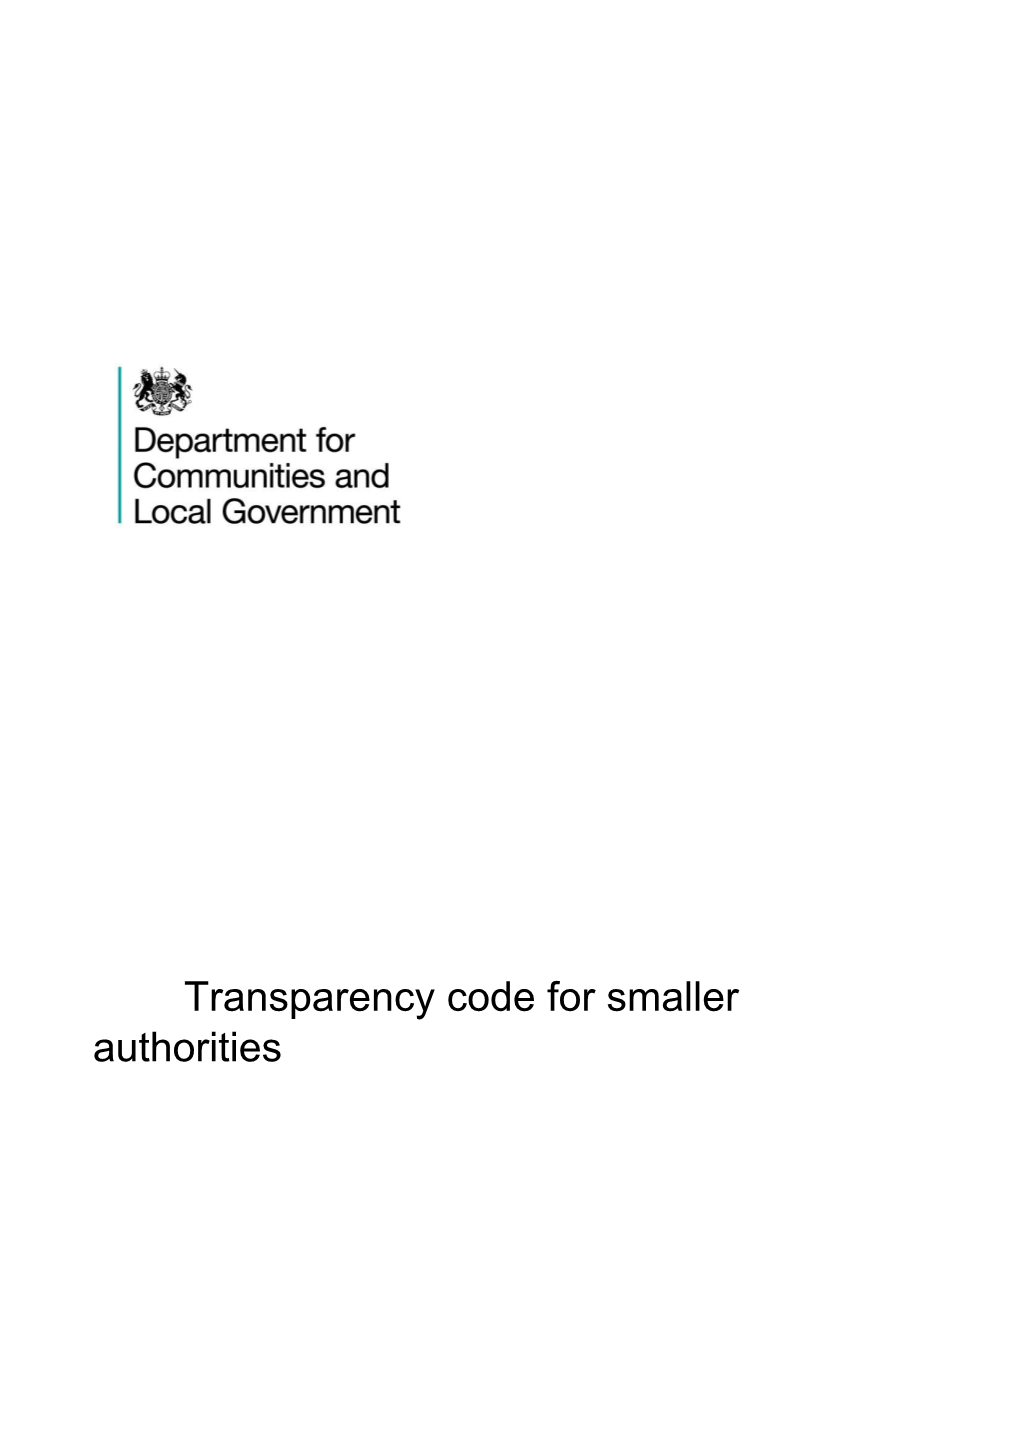 Transparency Code for Smaller Authorities